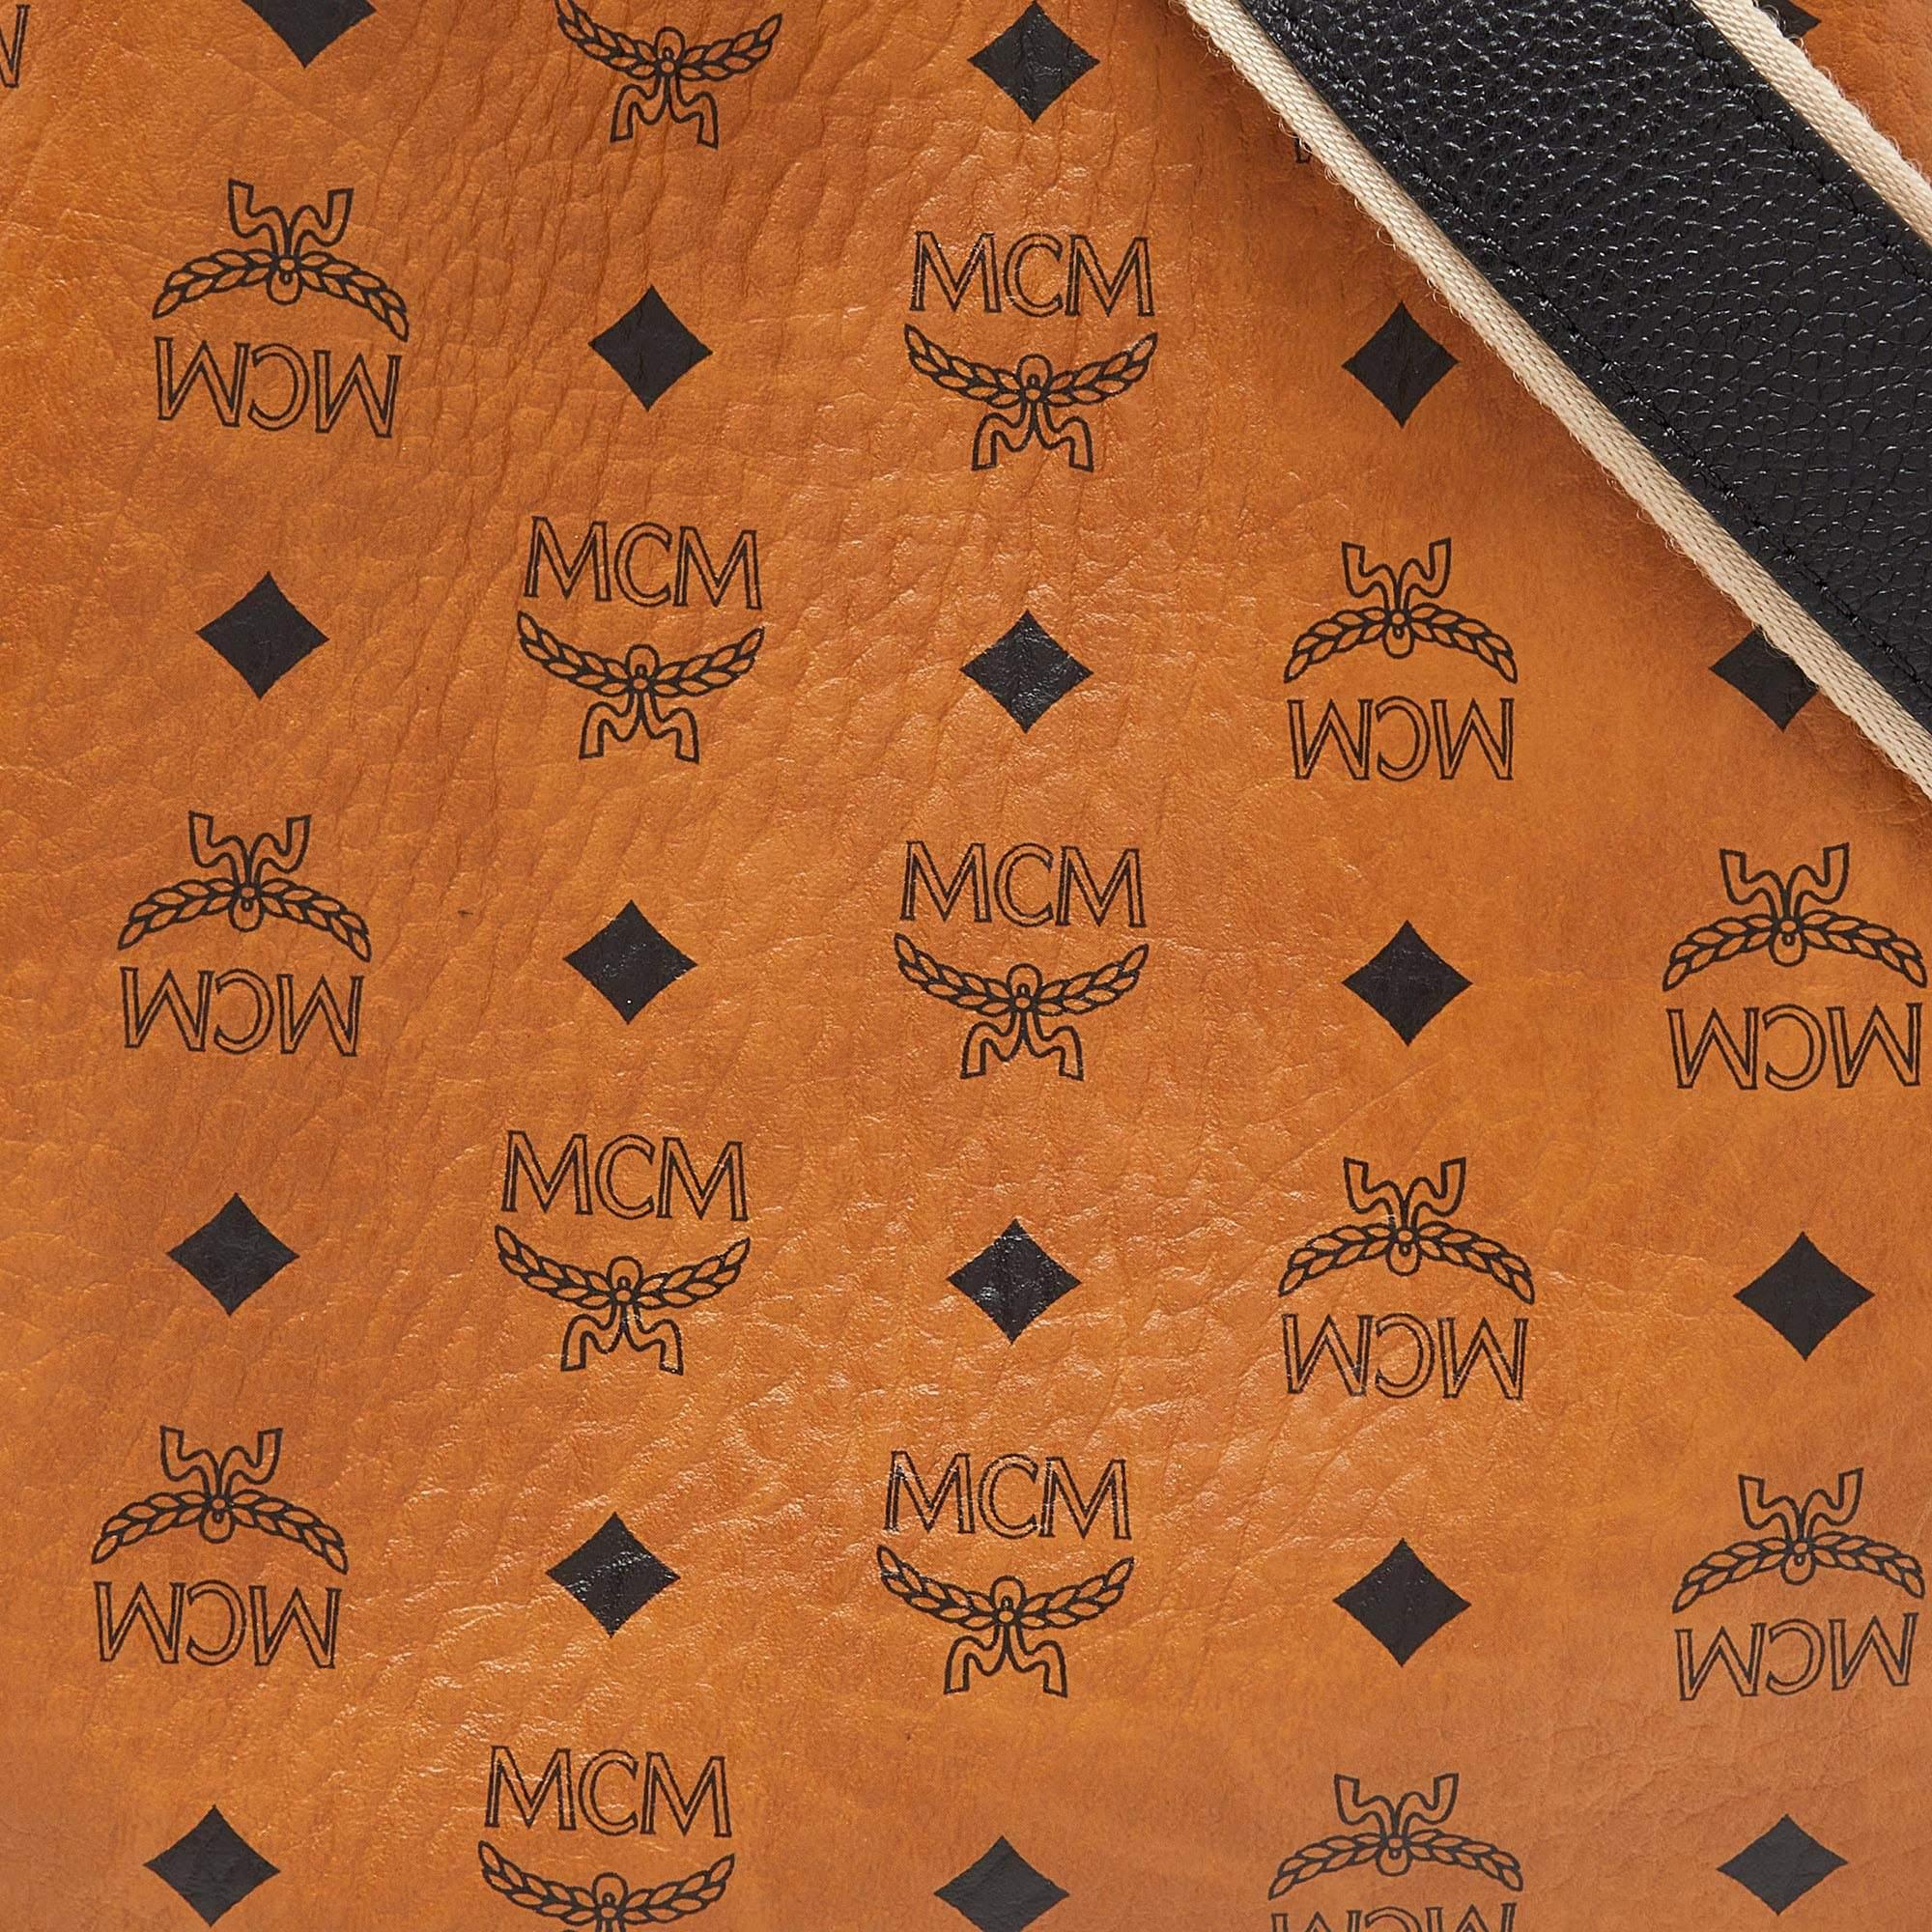 Elevate your everyday elegance with this MCM women's tote. Meticulously crafted, it seamlessly blends luxury and functionality to be a reliable accessory.

